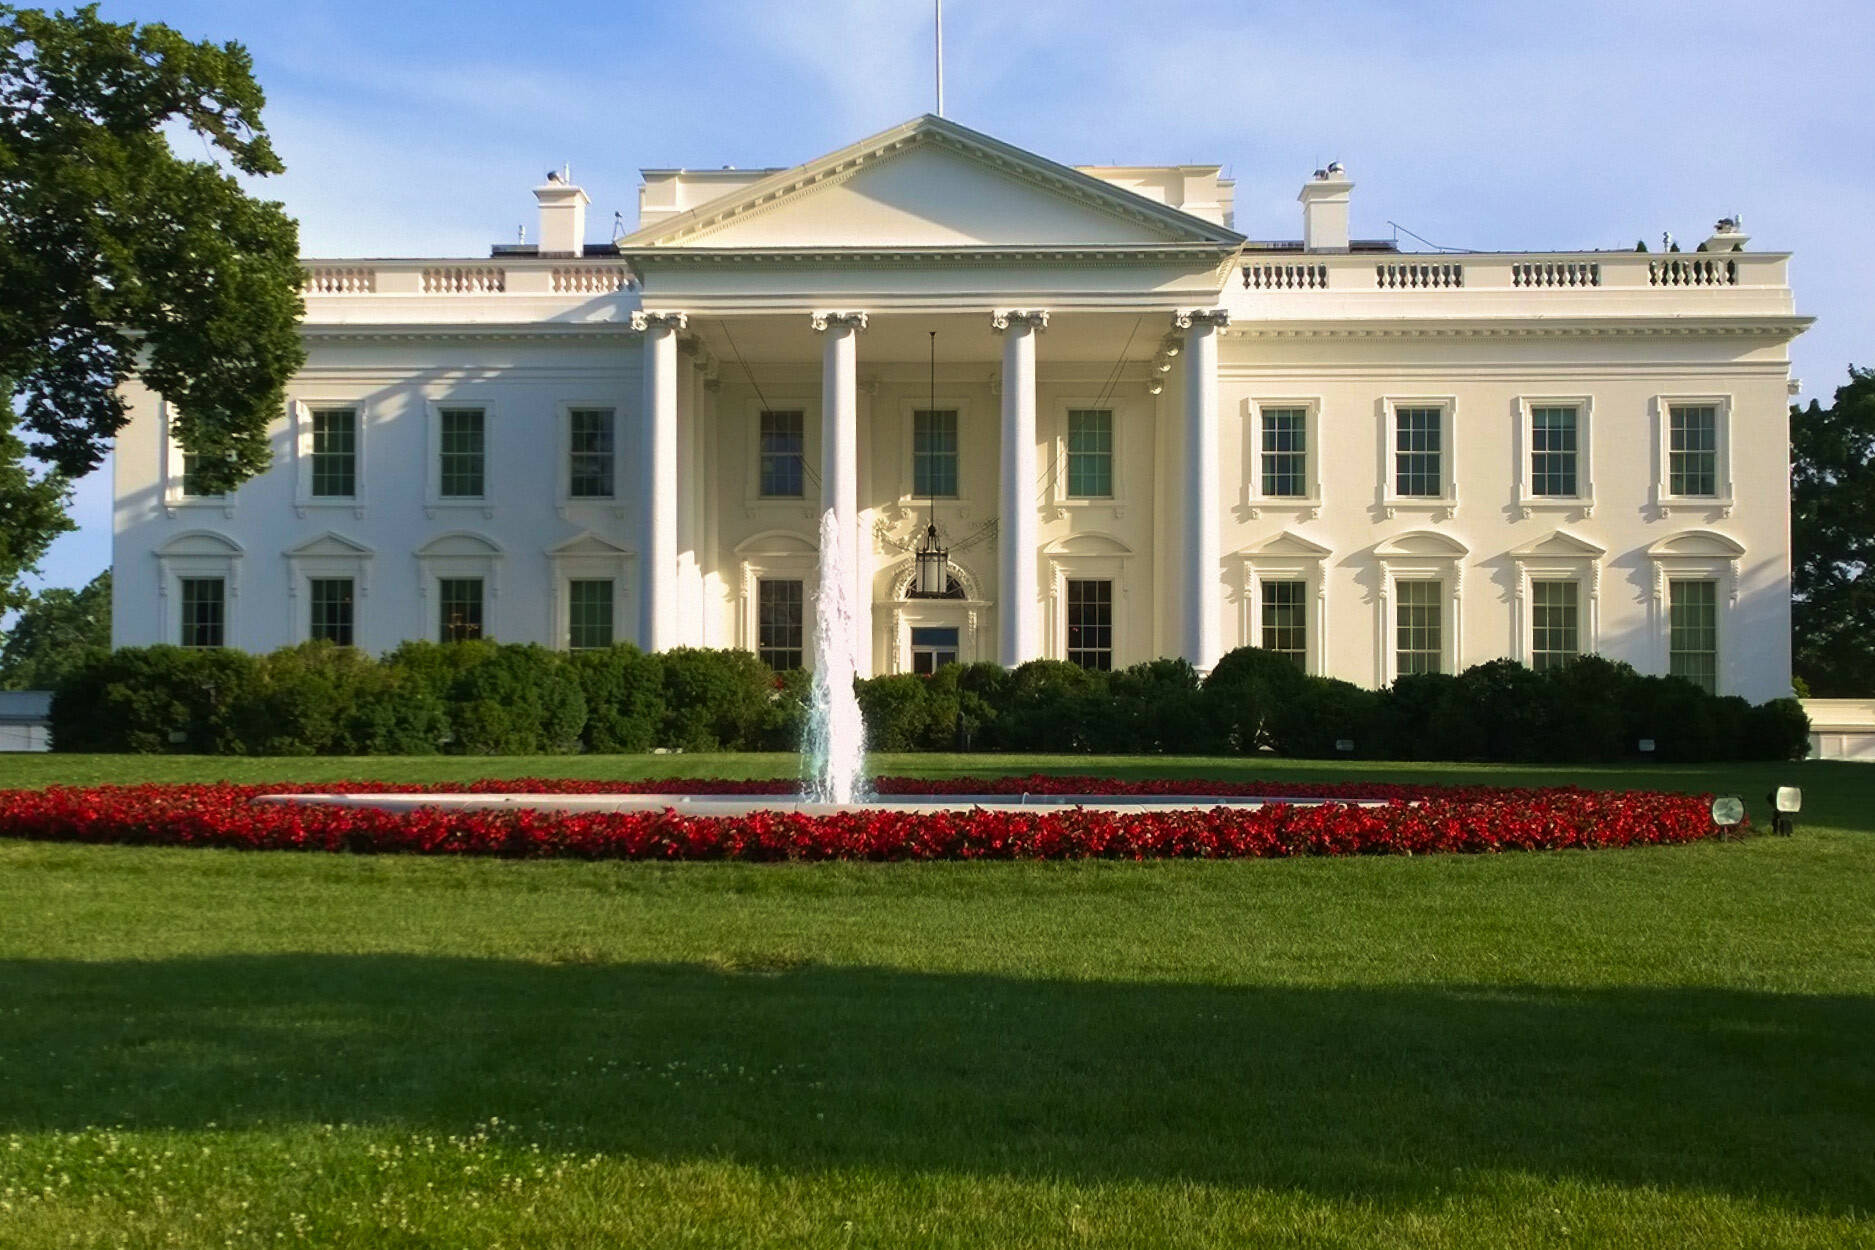 The White House, heavily renovated over the years, has been the home of America’s presidents since the country’s infancy. (Courtesy Photo / The White House)